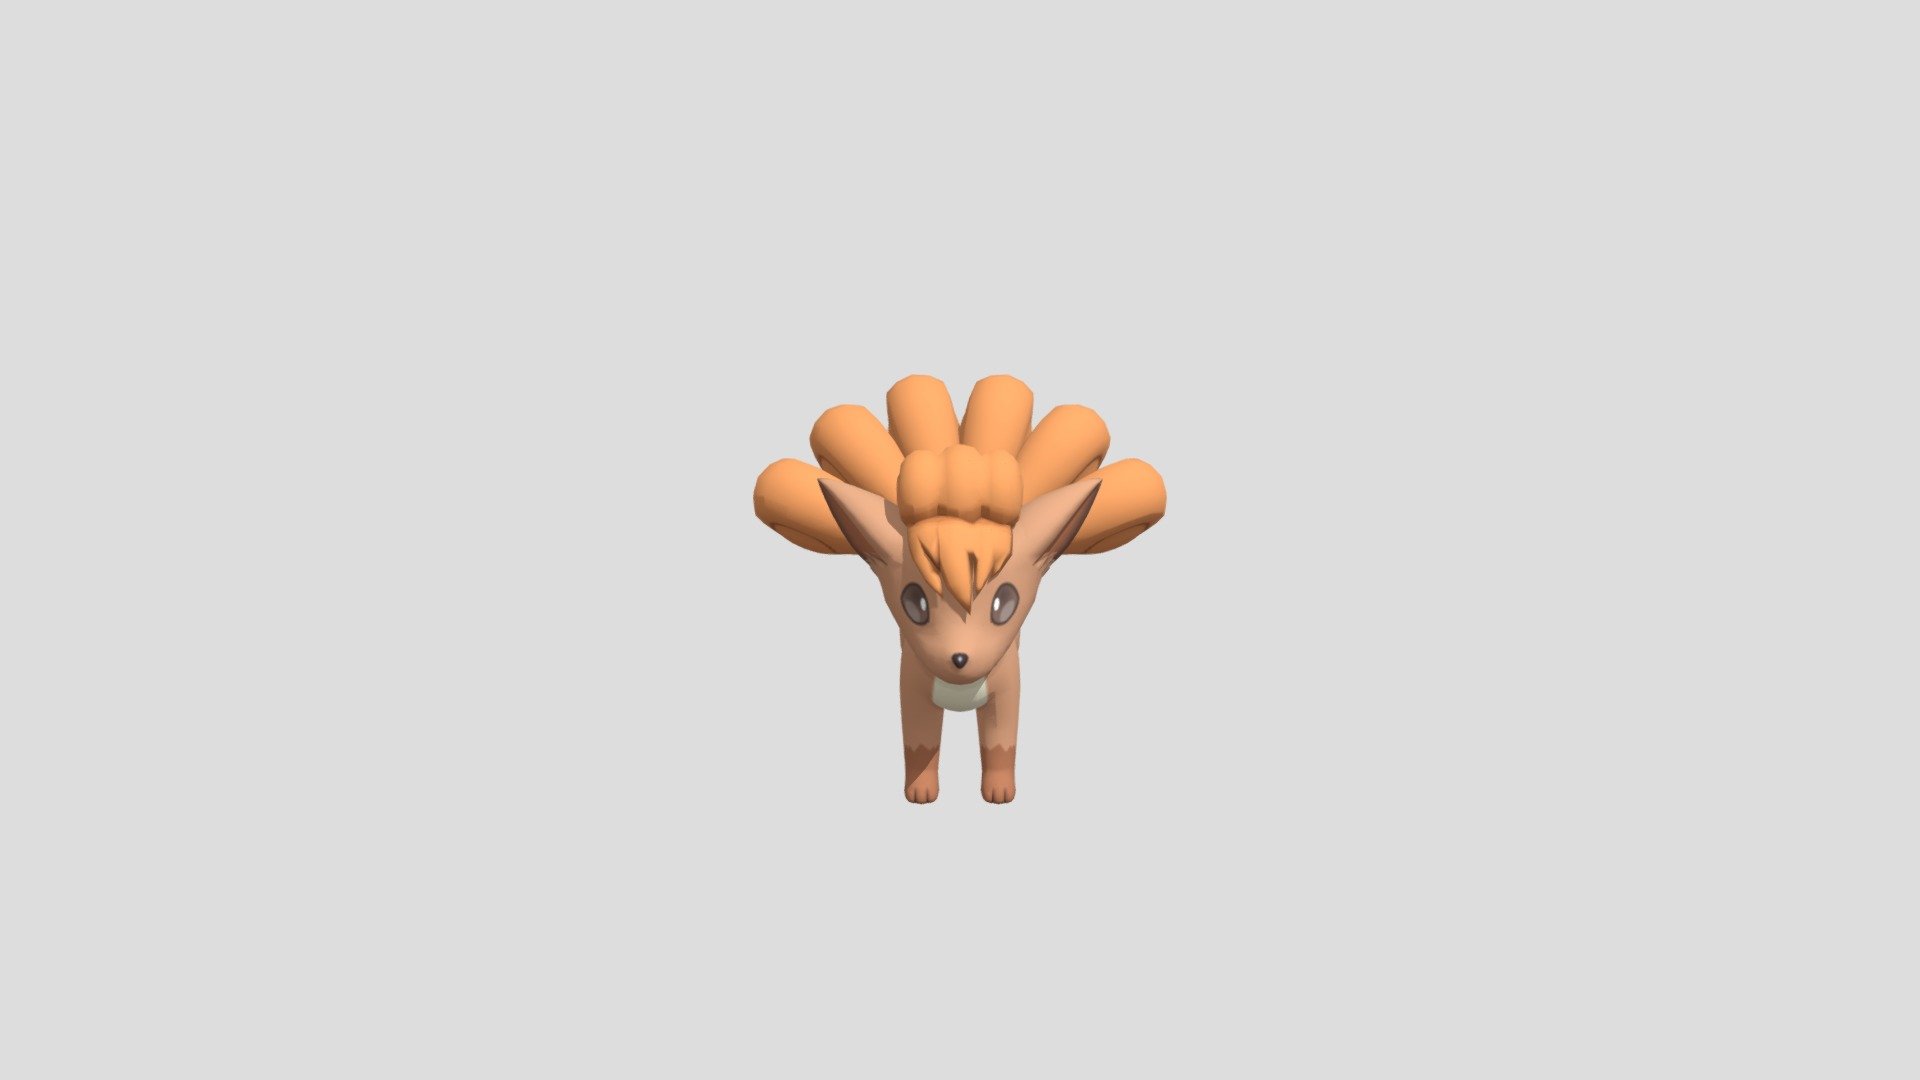 Fox Pokémon
At the time of its birth, Vulpix has one white tail. The tail separates into six if this Pokémon receives plenty of love from its Trainer. The six tails become magnificently curled 3d model